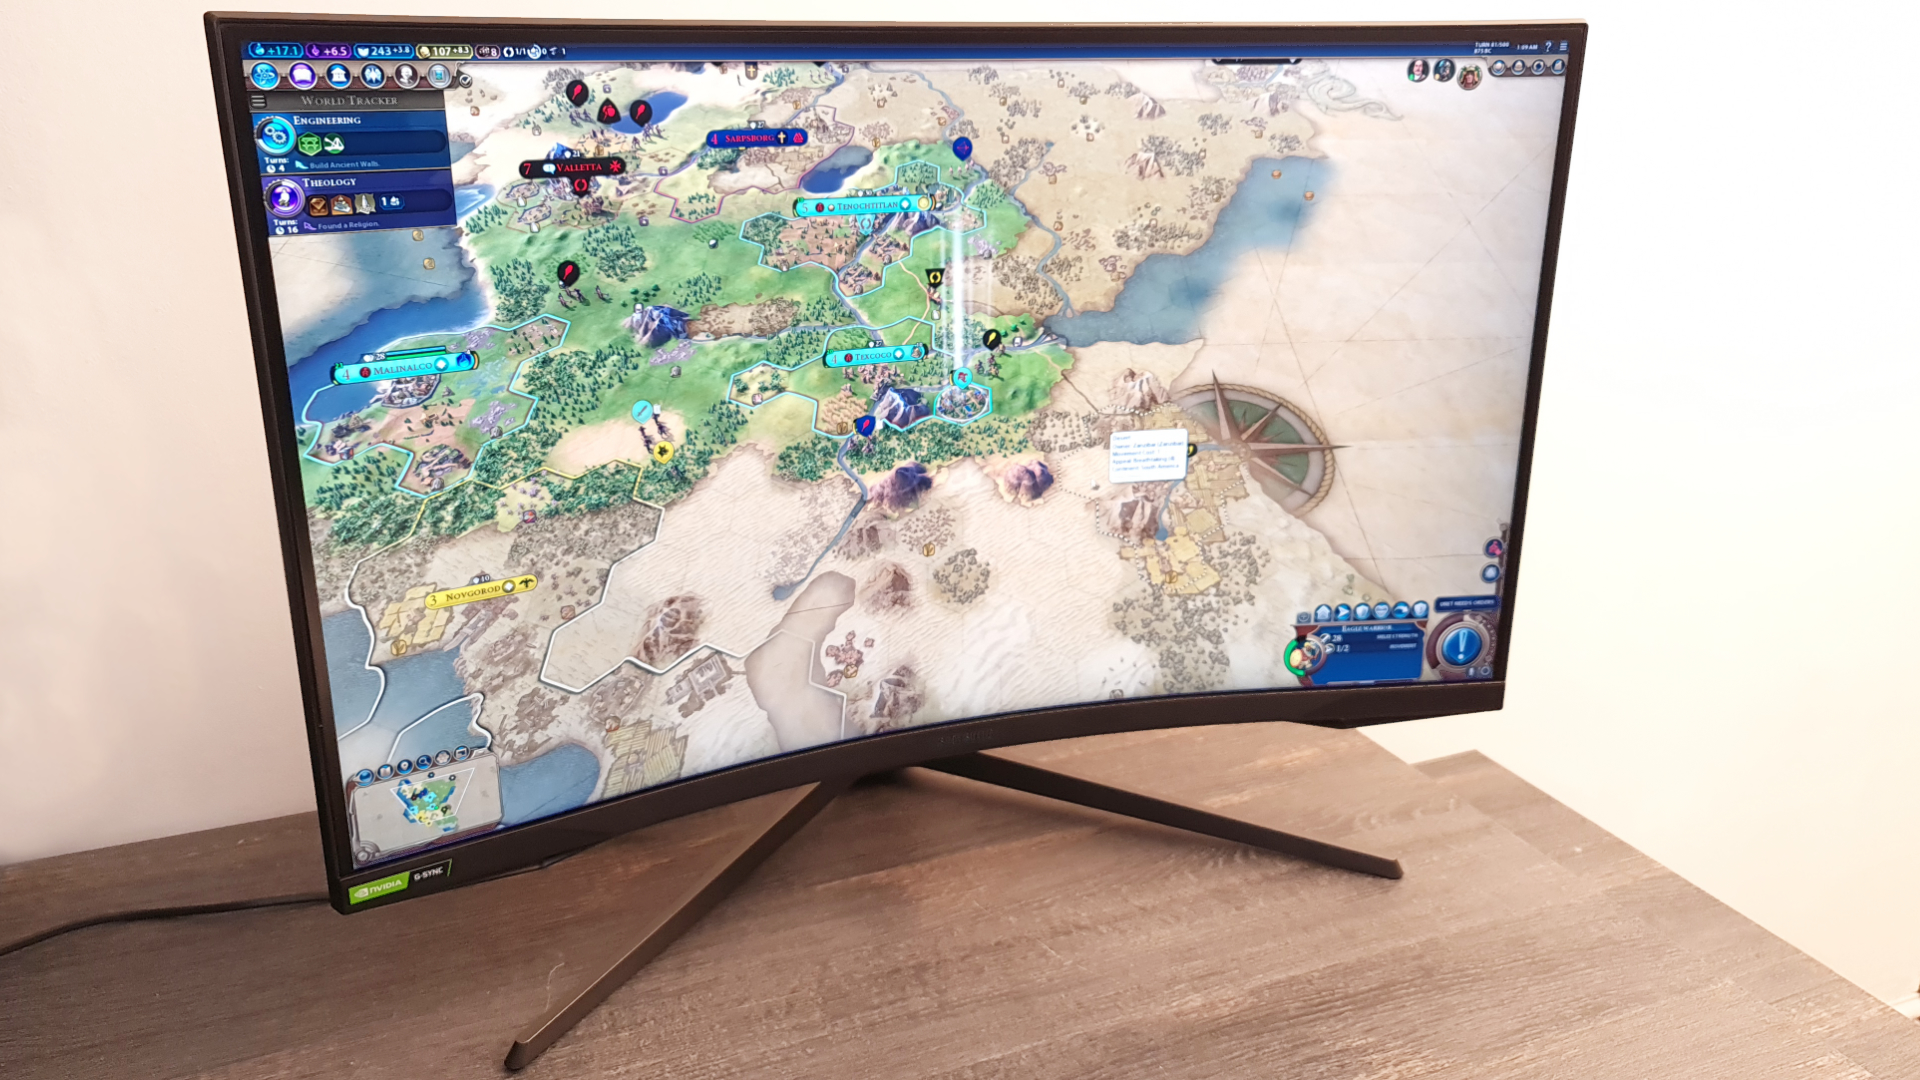 Samsung Odyssey G7 Gaming Monitor Review